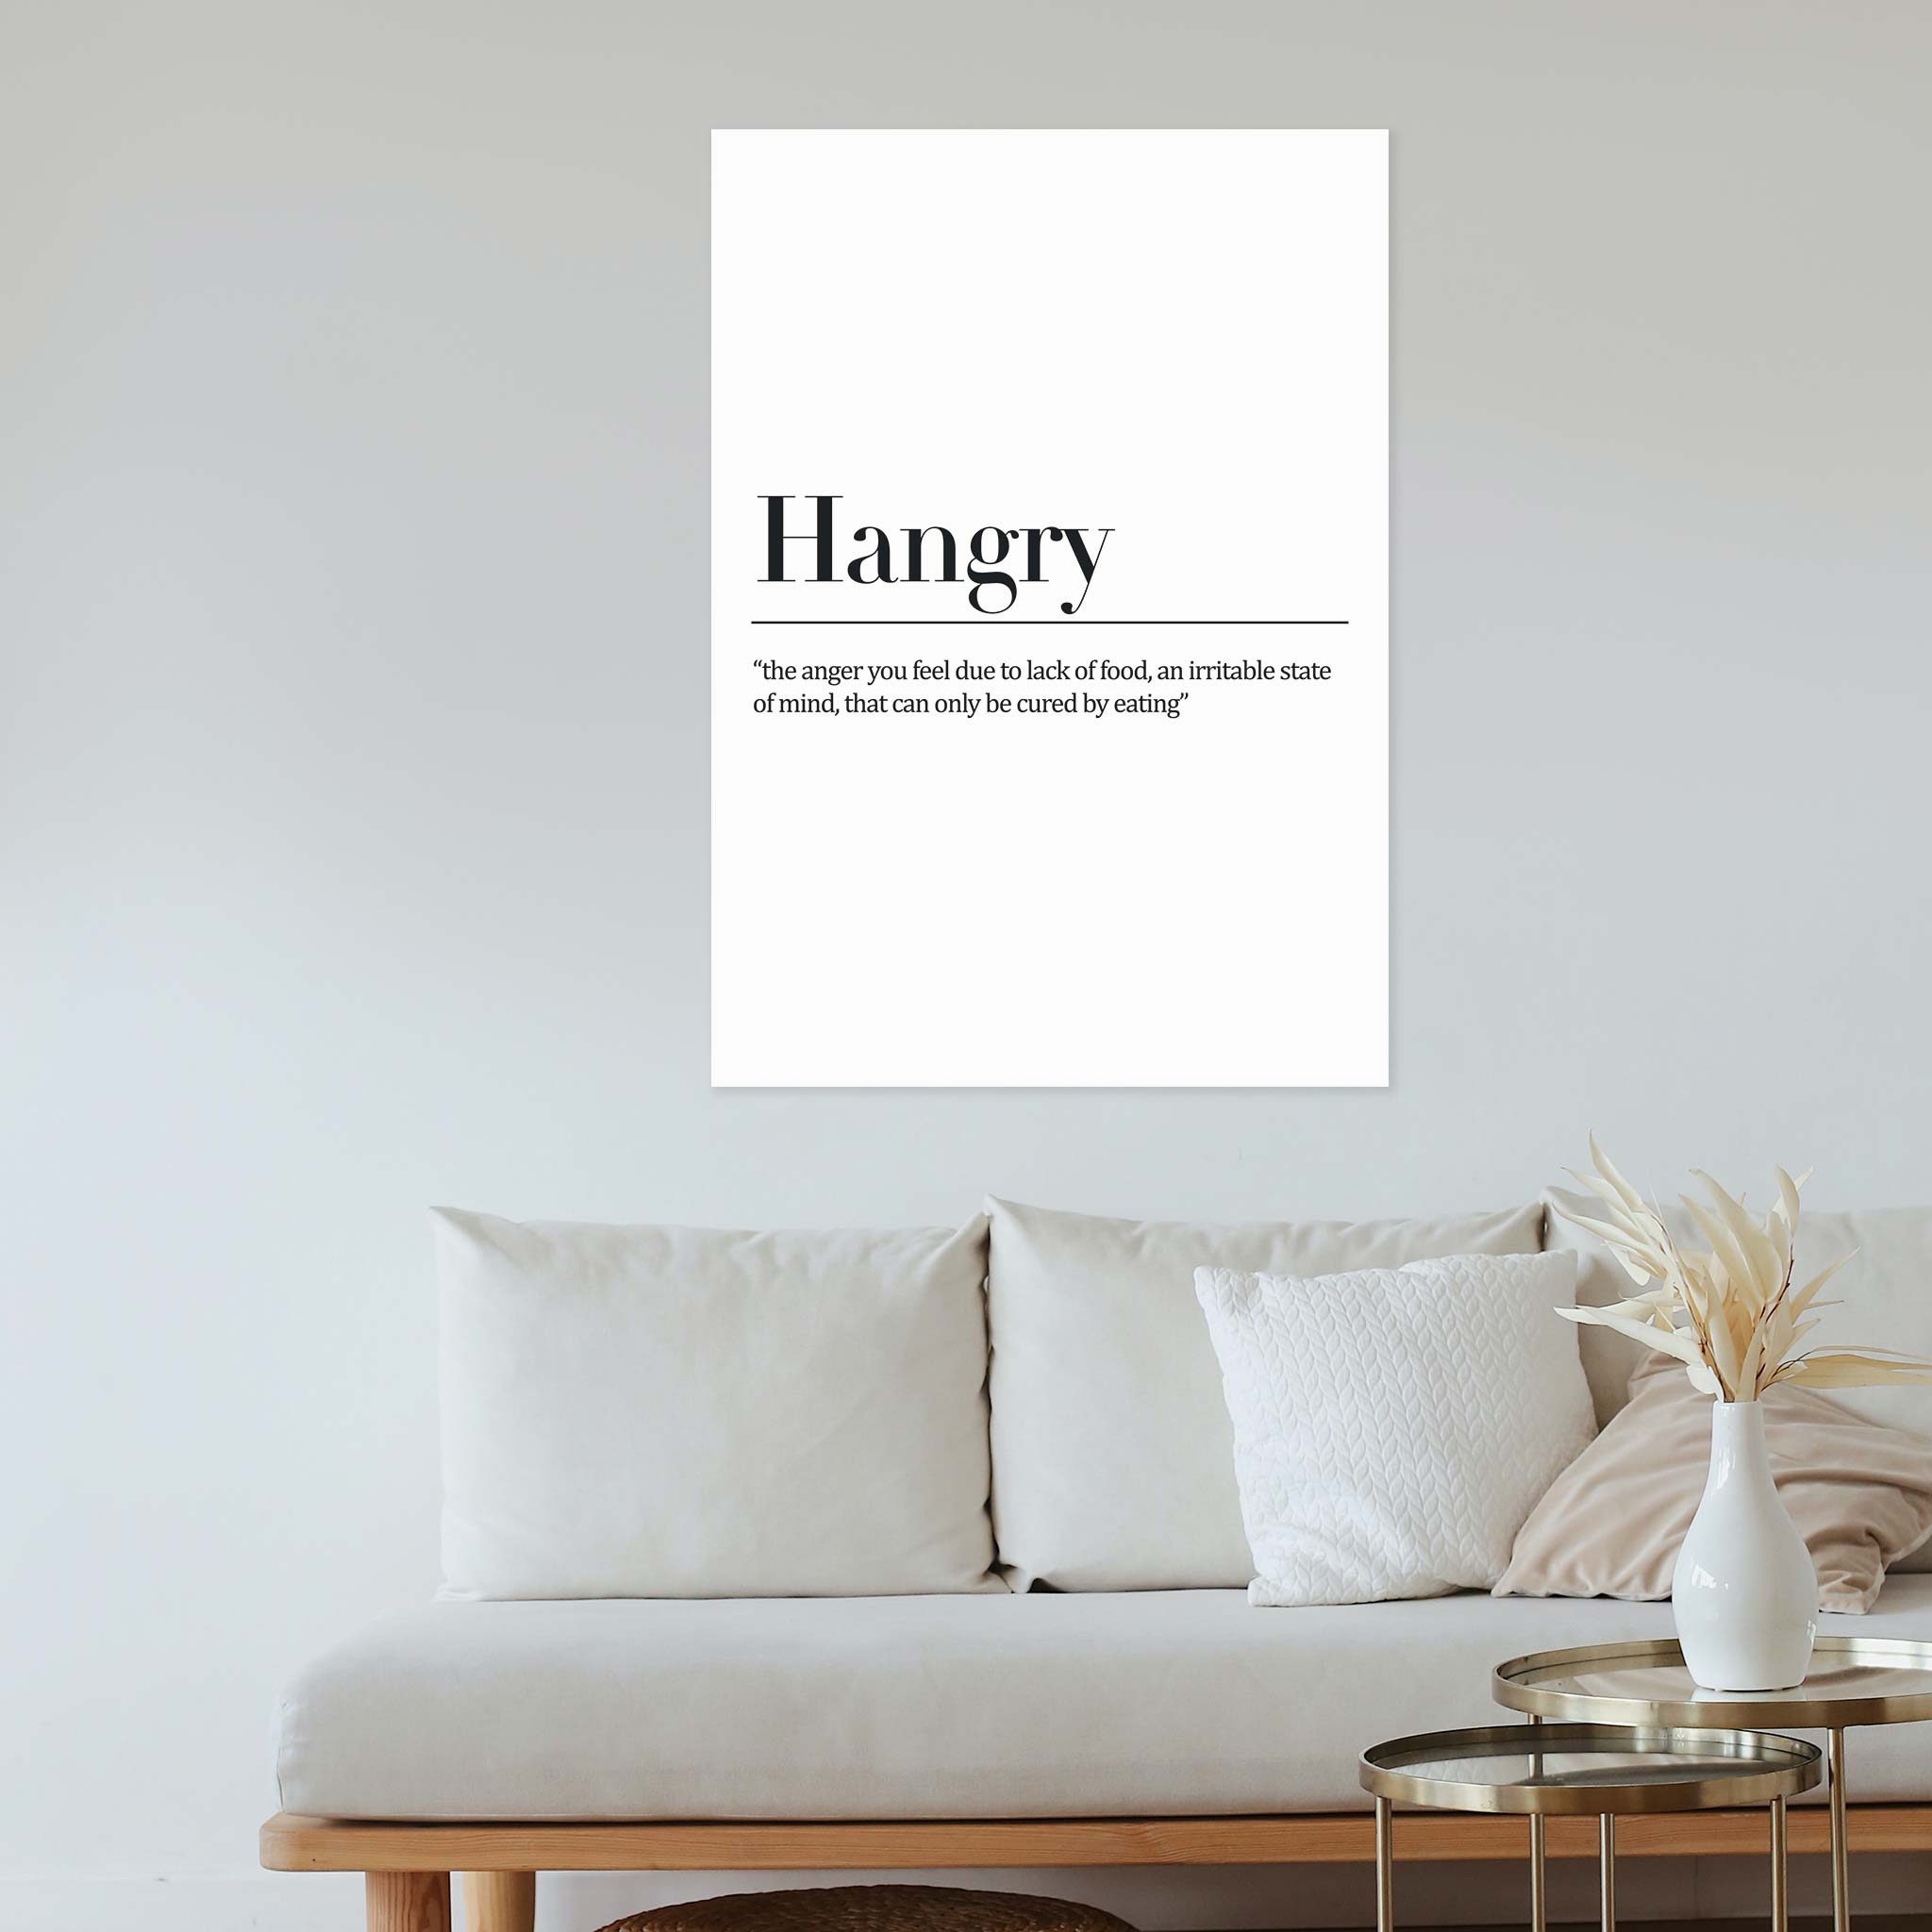 Hangry- 'the anger you feel due to lack of food, an irritable state of mind, that can only be cured by eating'